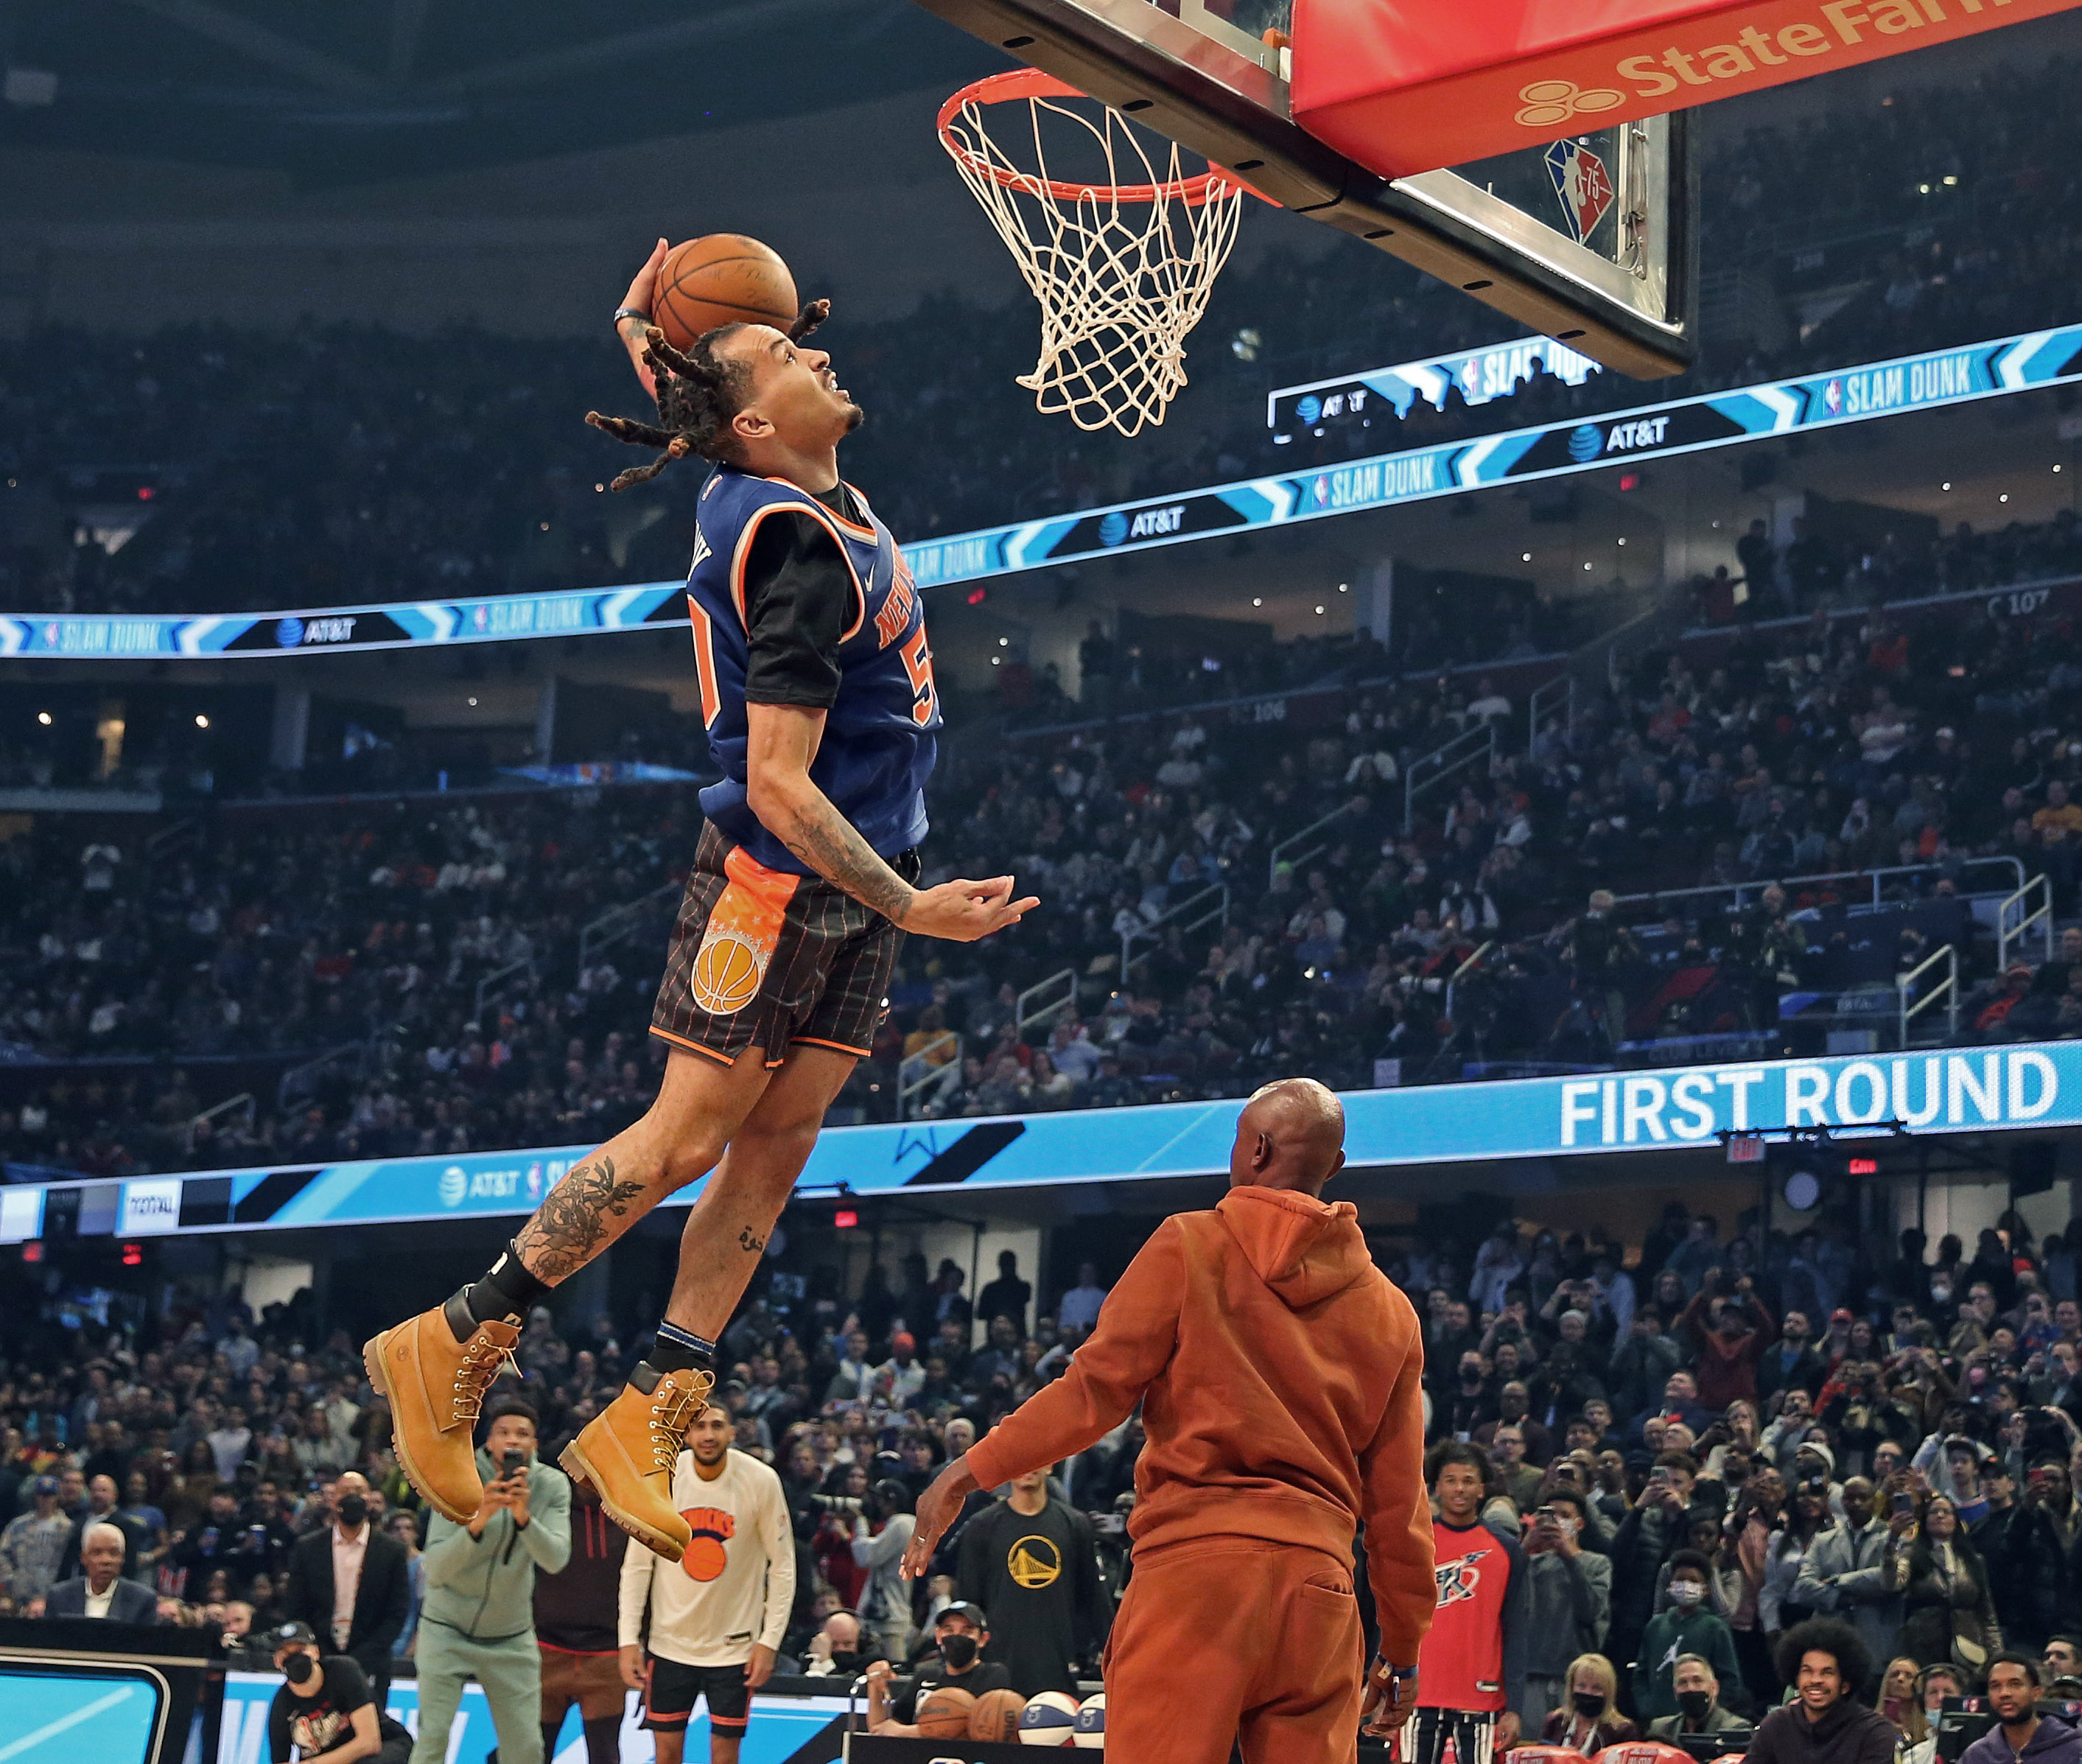 NBA All Star Saturday Night slam dunk competition, February 19, 2022